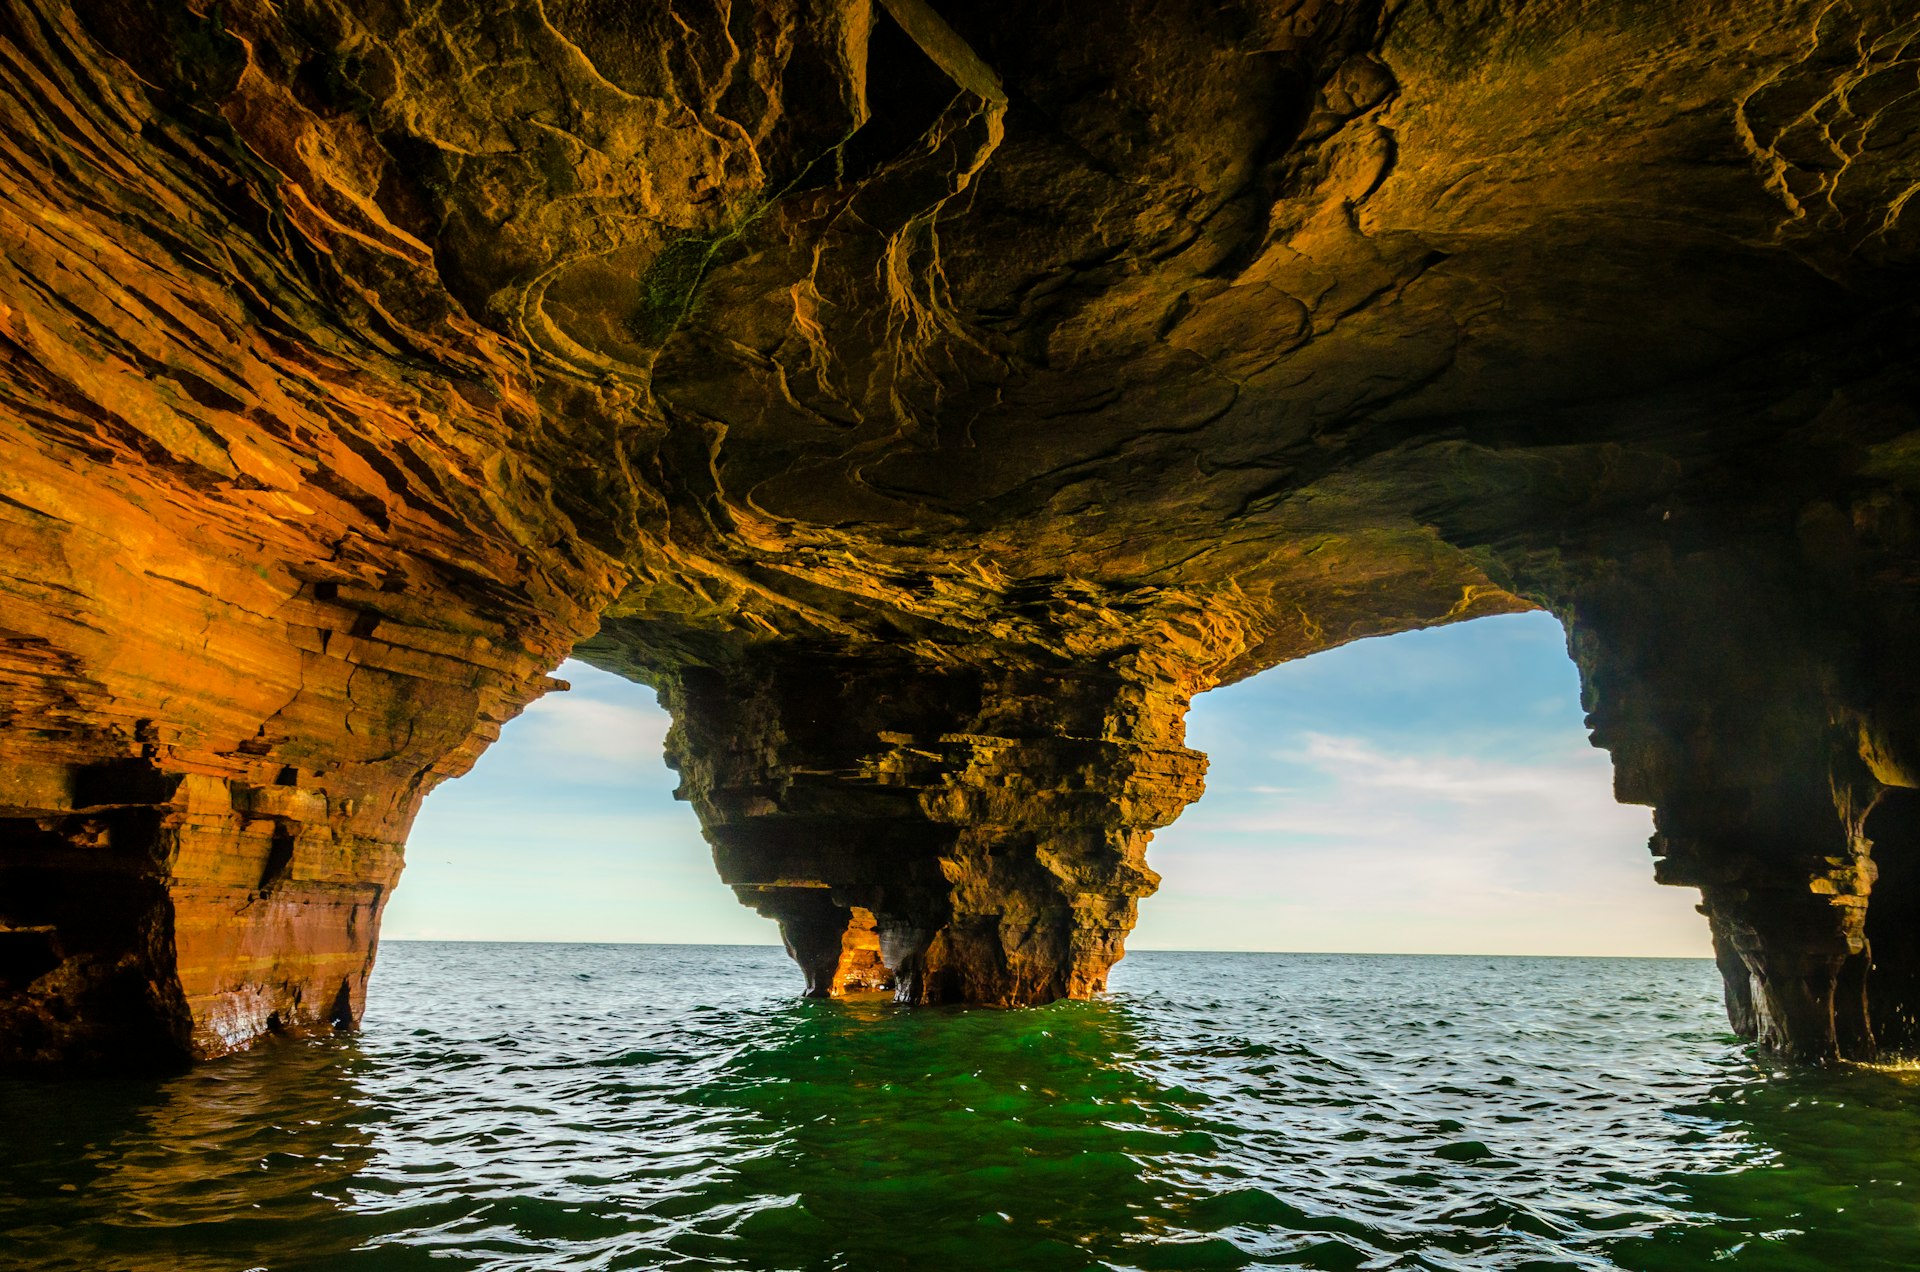 A sea cave near Devil's Island in the Apostle Islands National Lakeshore. The roof of the cave is supported by three thick columns of layered stone, which is illuminated in bright oranges and yellows on the left, dark blacks and yellows in the middle, and deep greenish browns on the right. The light plays on the swirled rock of the cave roof in a way that seems to reflect the deep green waters below. In the far background, a blue sky is streaked with wispy white clouds. Scuba diving in national parks